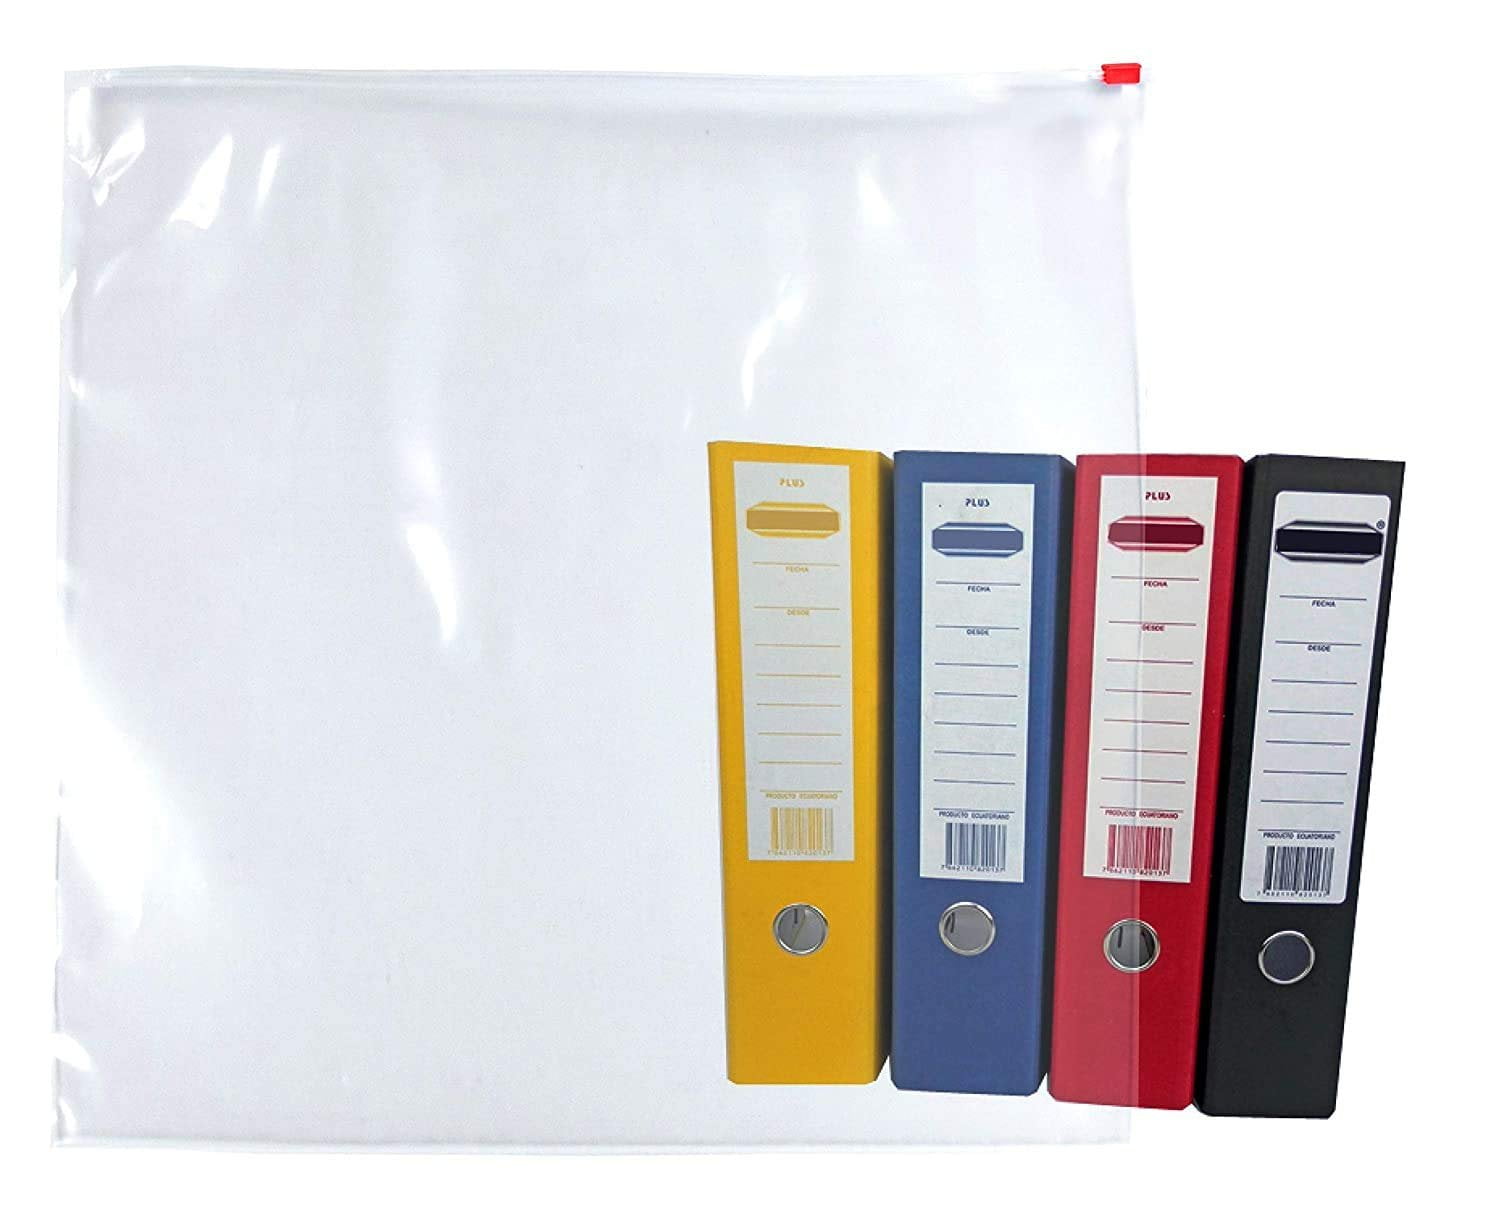 Dropship Pack Of 100 Slider Zipper Bags 6 X 9. Clear Poly Bags 6x9.  Thickness 3 Mil. Polyethylene Bags For Packing And Storing. Plastic Bags  For Industrial; Food Service; Health Needs. to